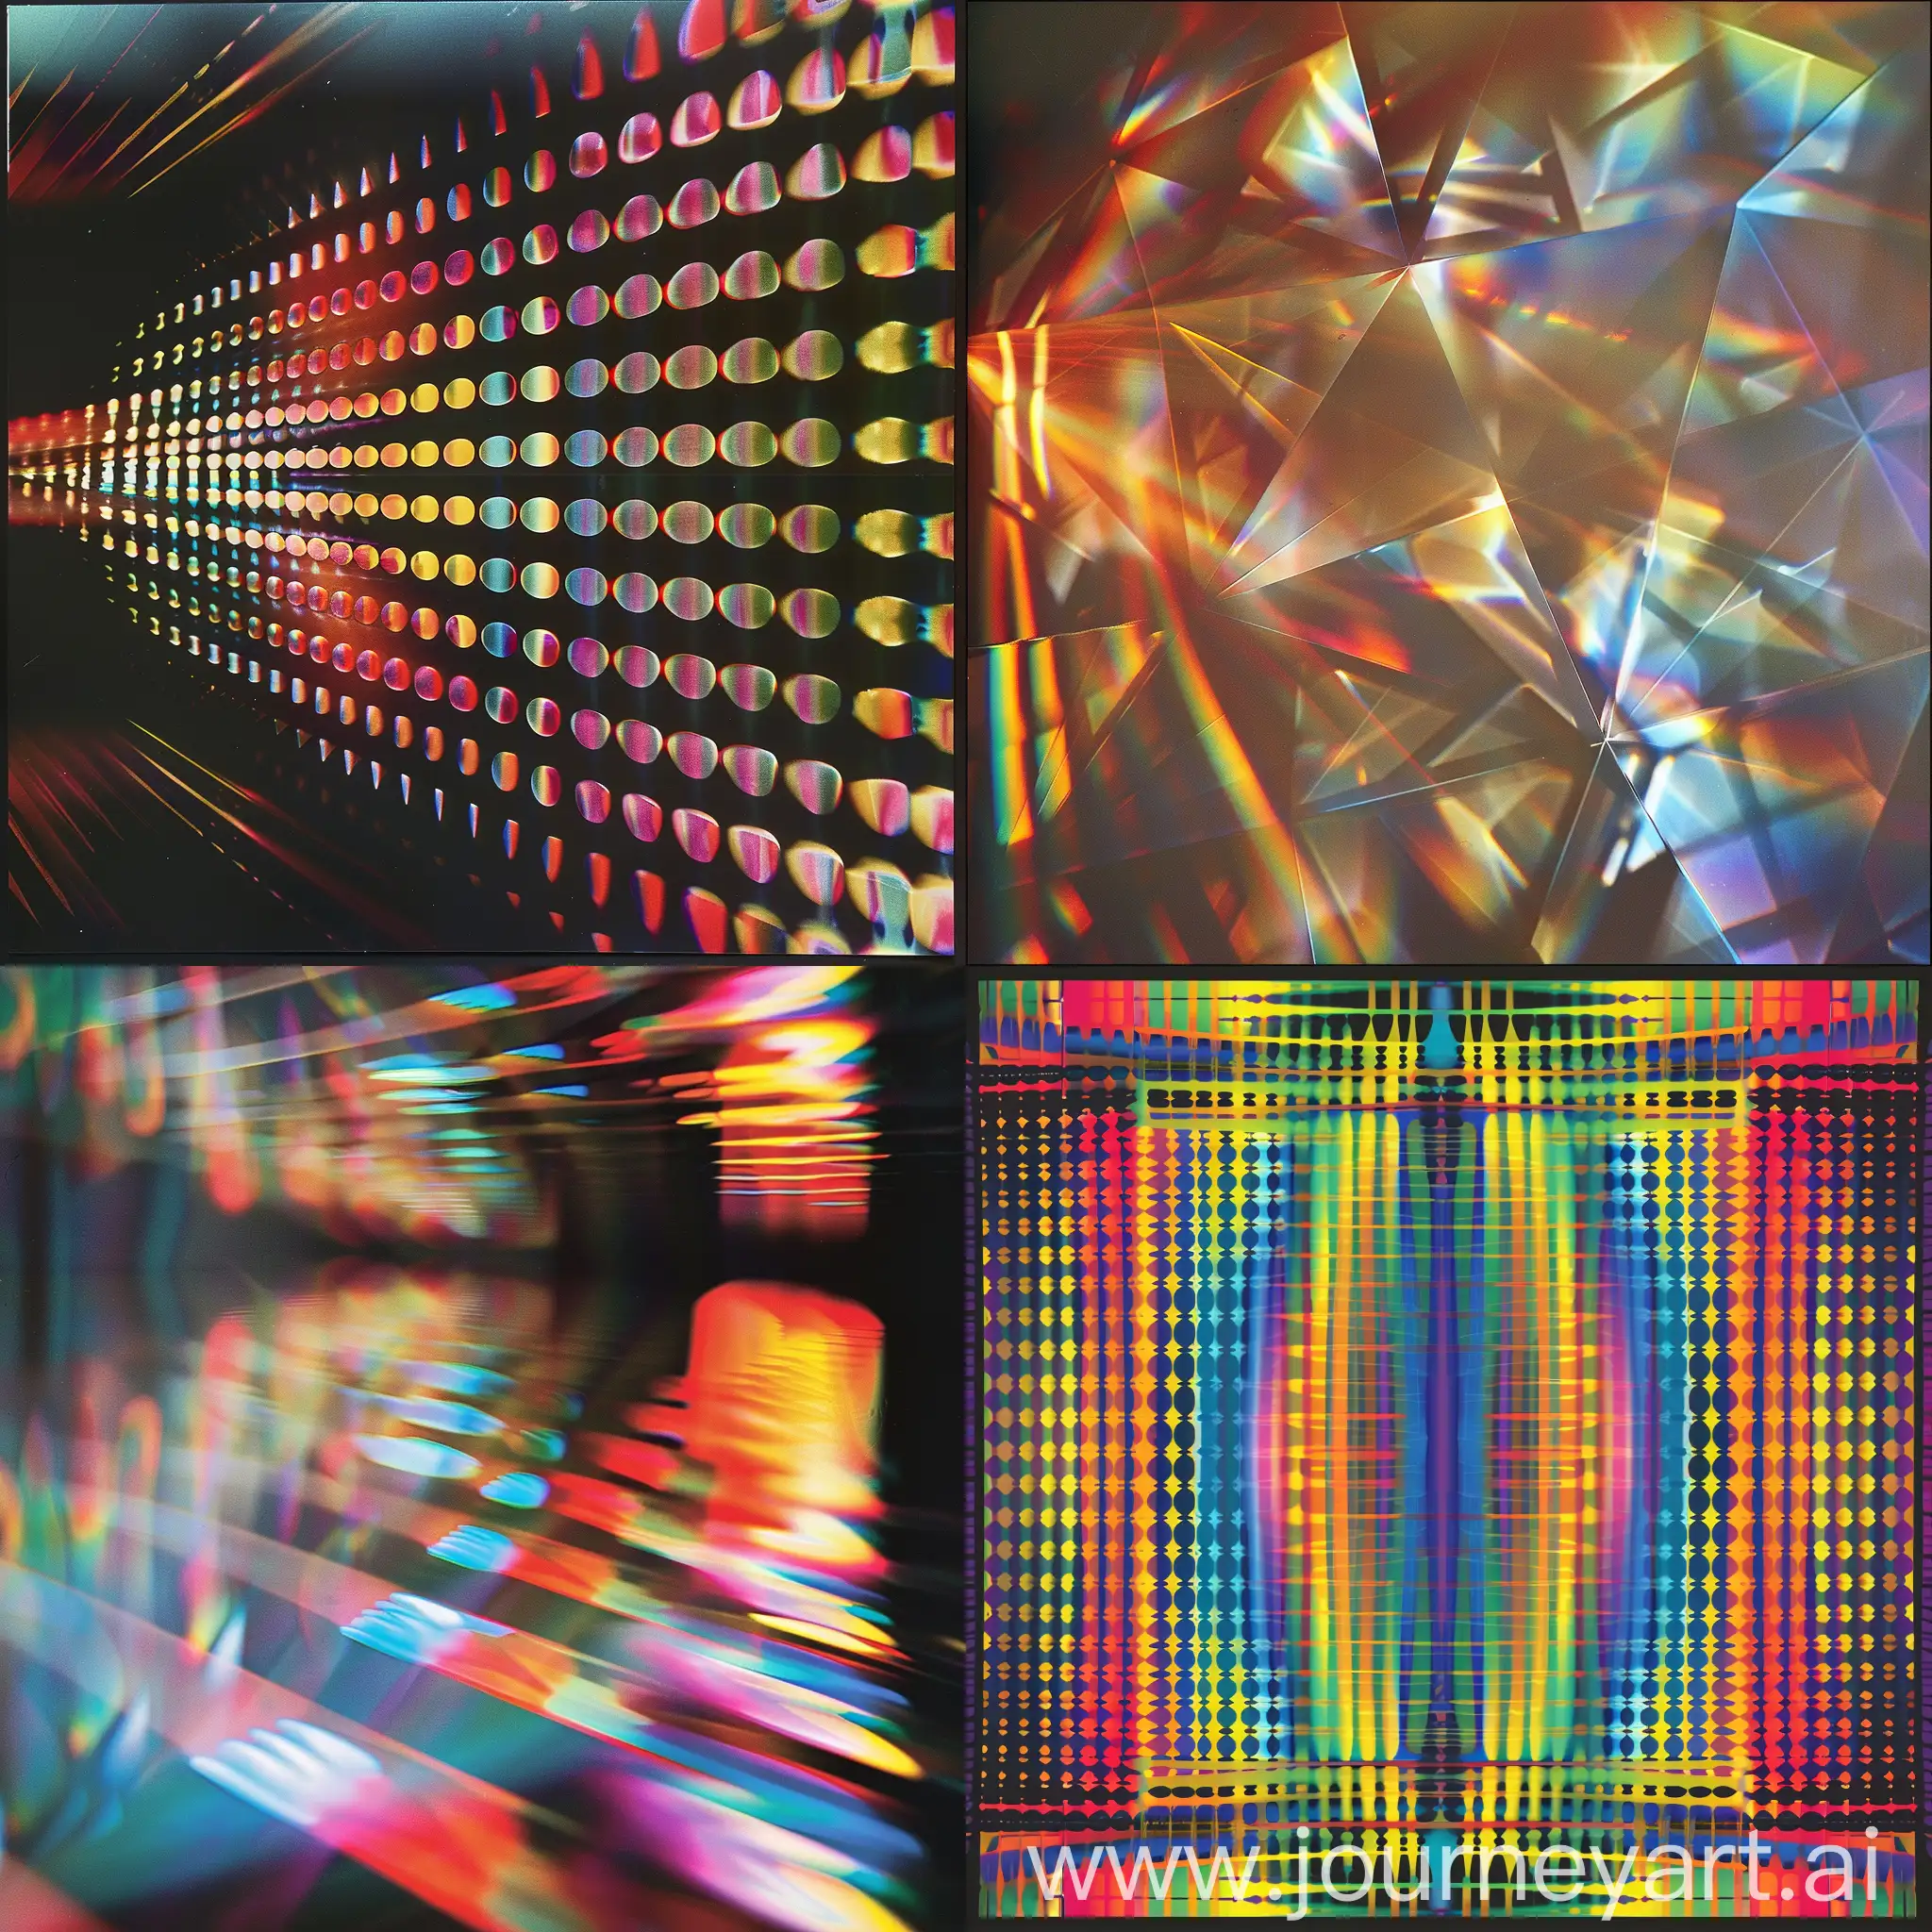 Vibrant-Diffraction-Patterns-in-a-Square-Format